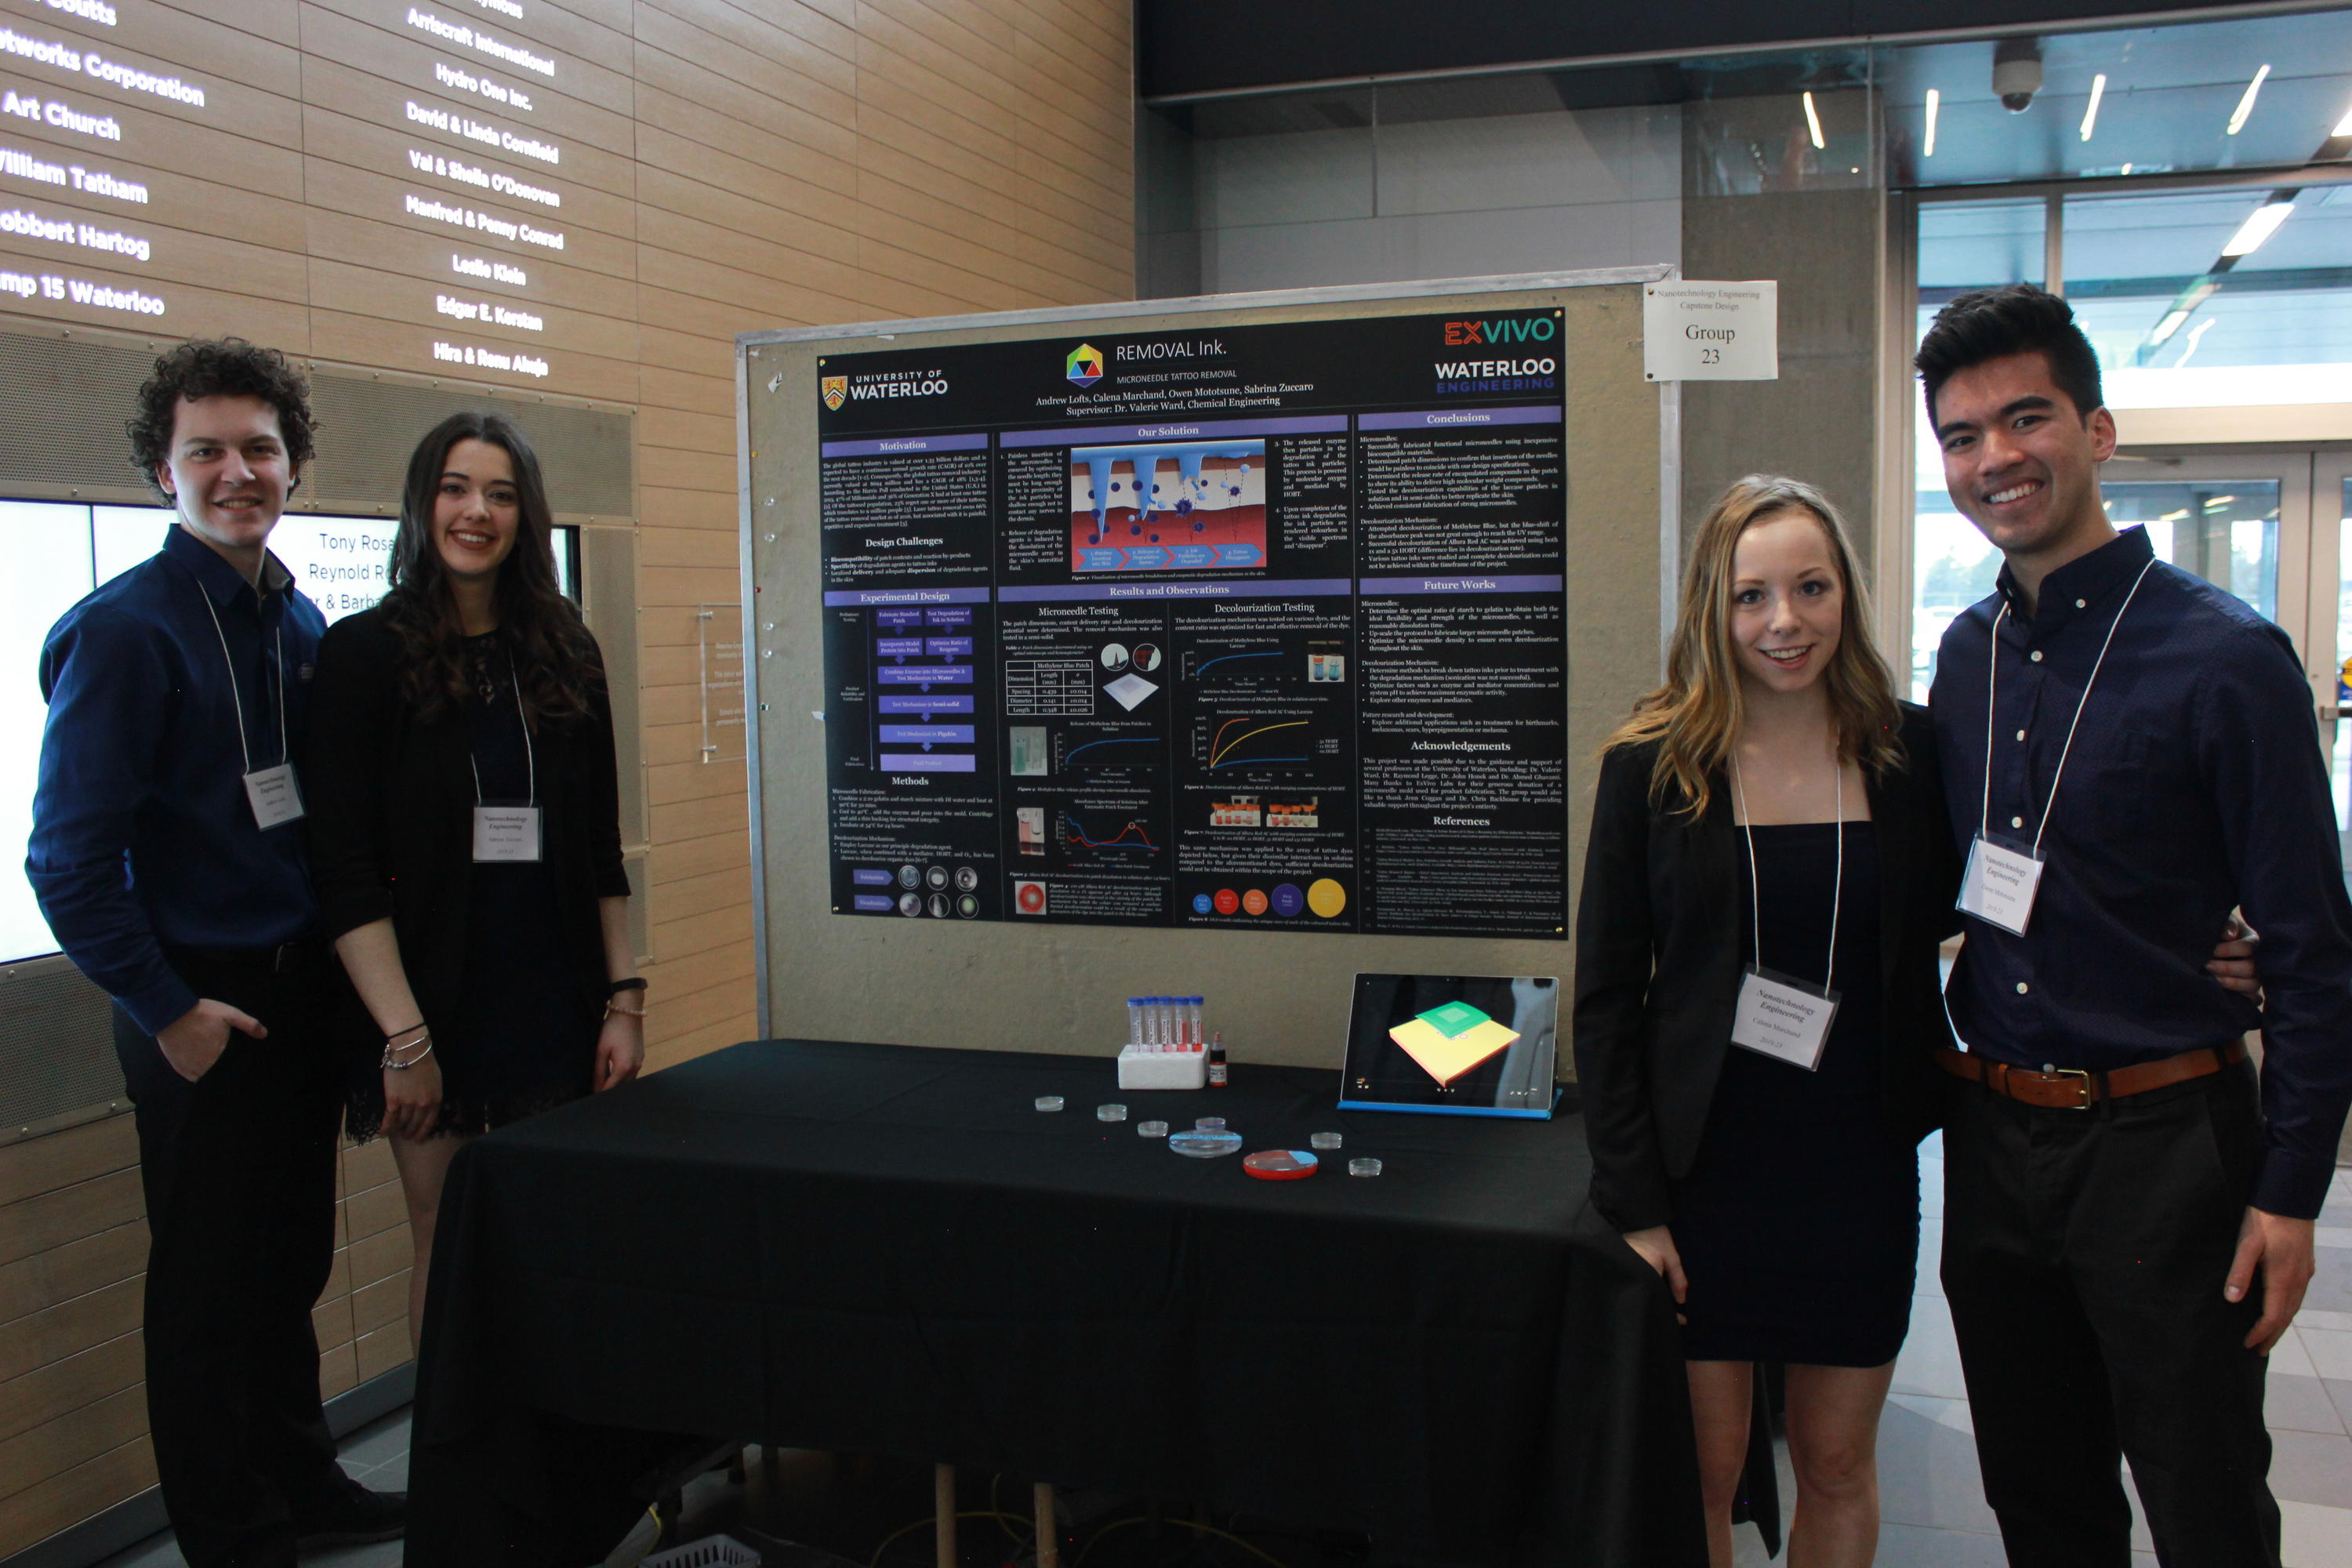 Team 23 students with their project poster at the 2019 Capstone Design Symposium.